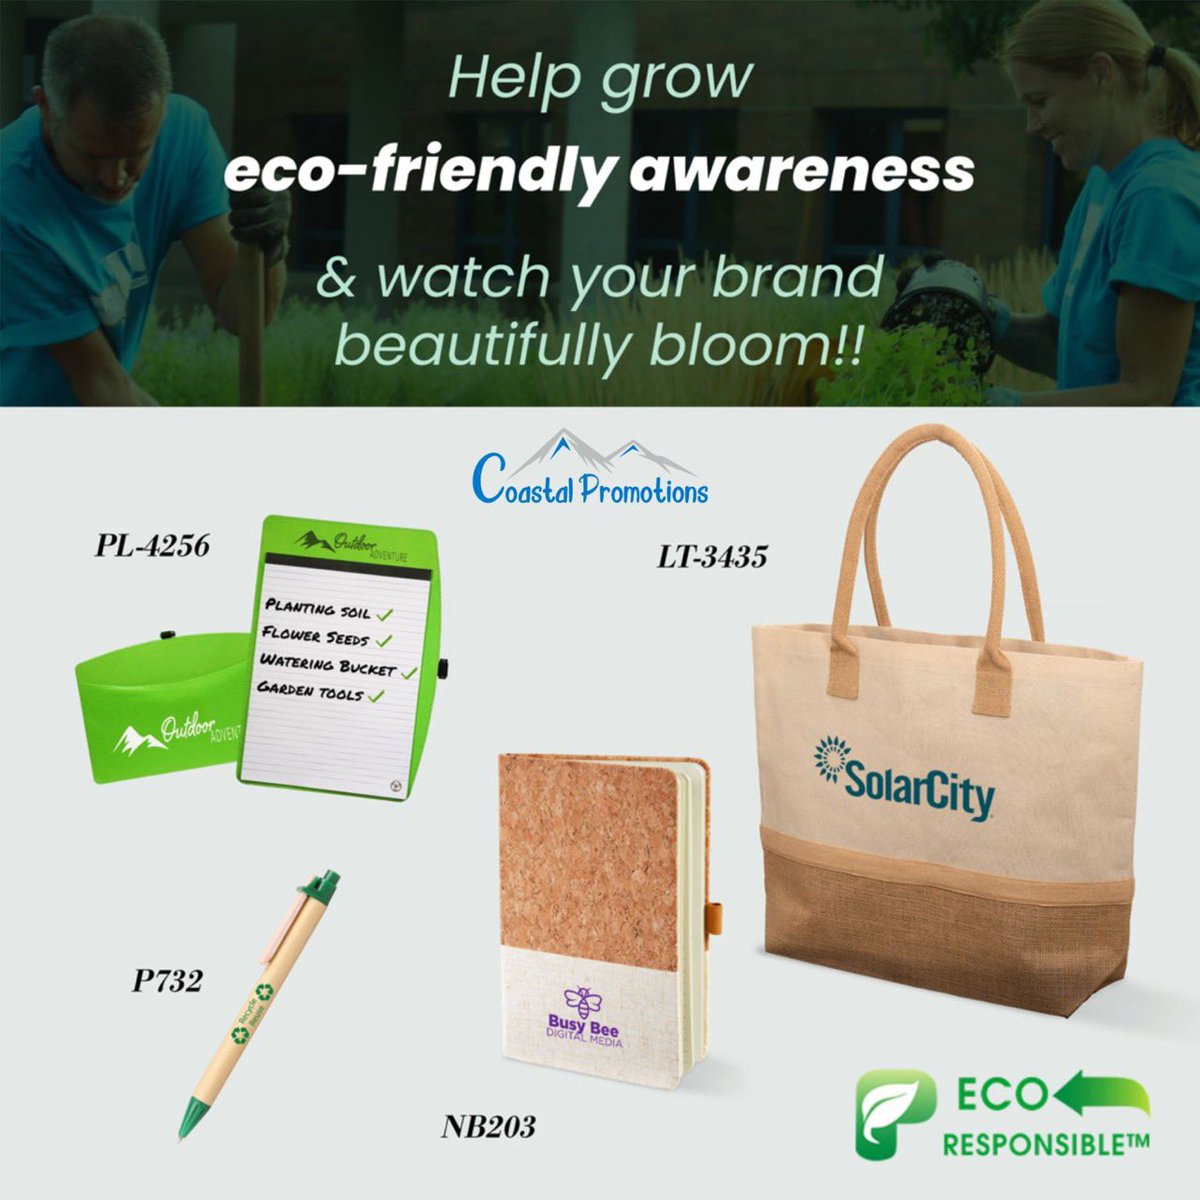 #CoastalPromo wants to help grow your #ecofriendly awarness and watch your #brand beautifully bloom! We have a host of #ecofriendlyproducts ready to #decorate with your #companylogo. #ContactUs today for a #quote! 
.
.
#eco #ecoproducts #promotionalproducts #yourlogohere #swag